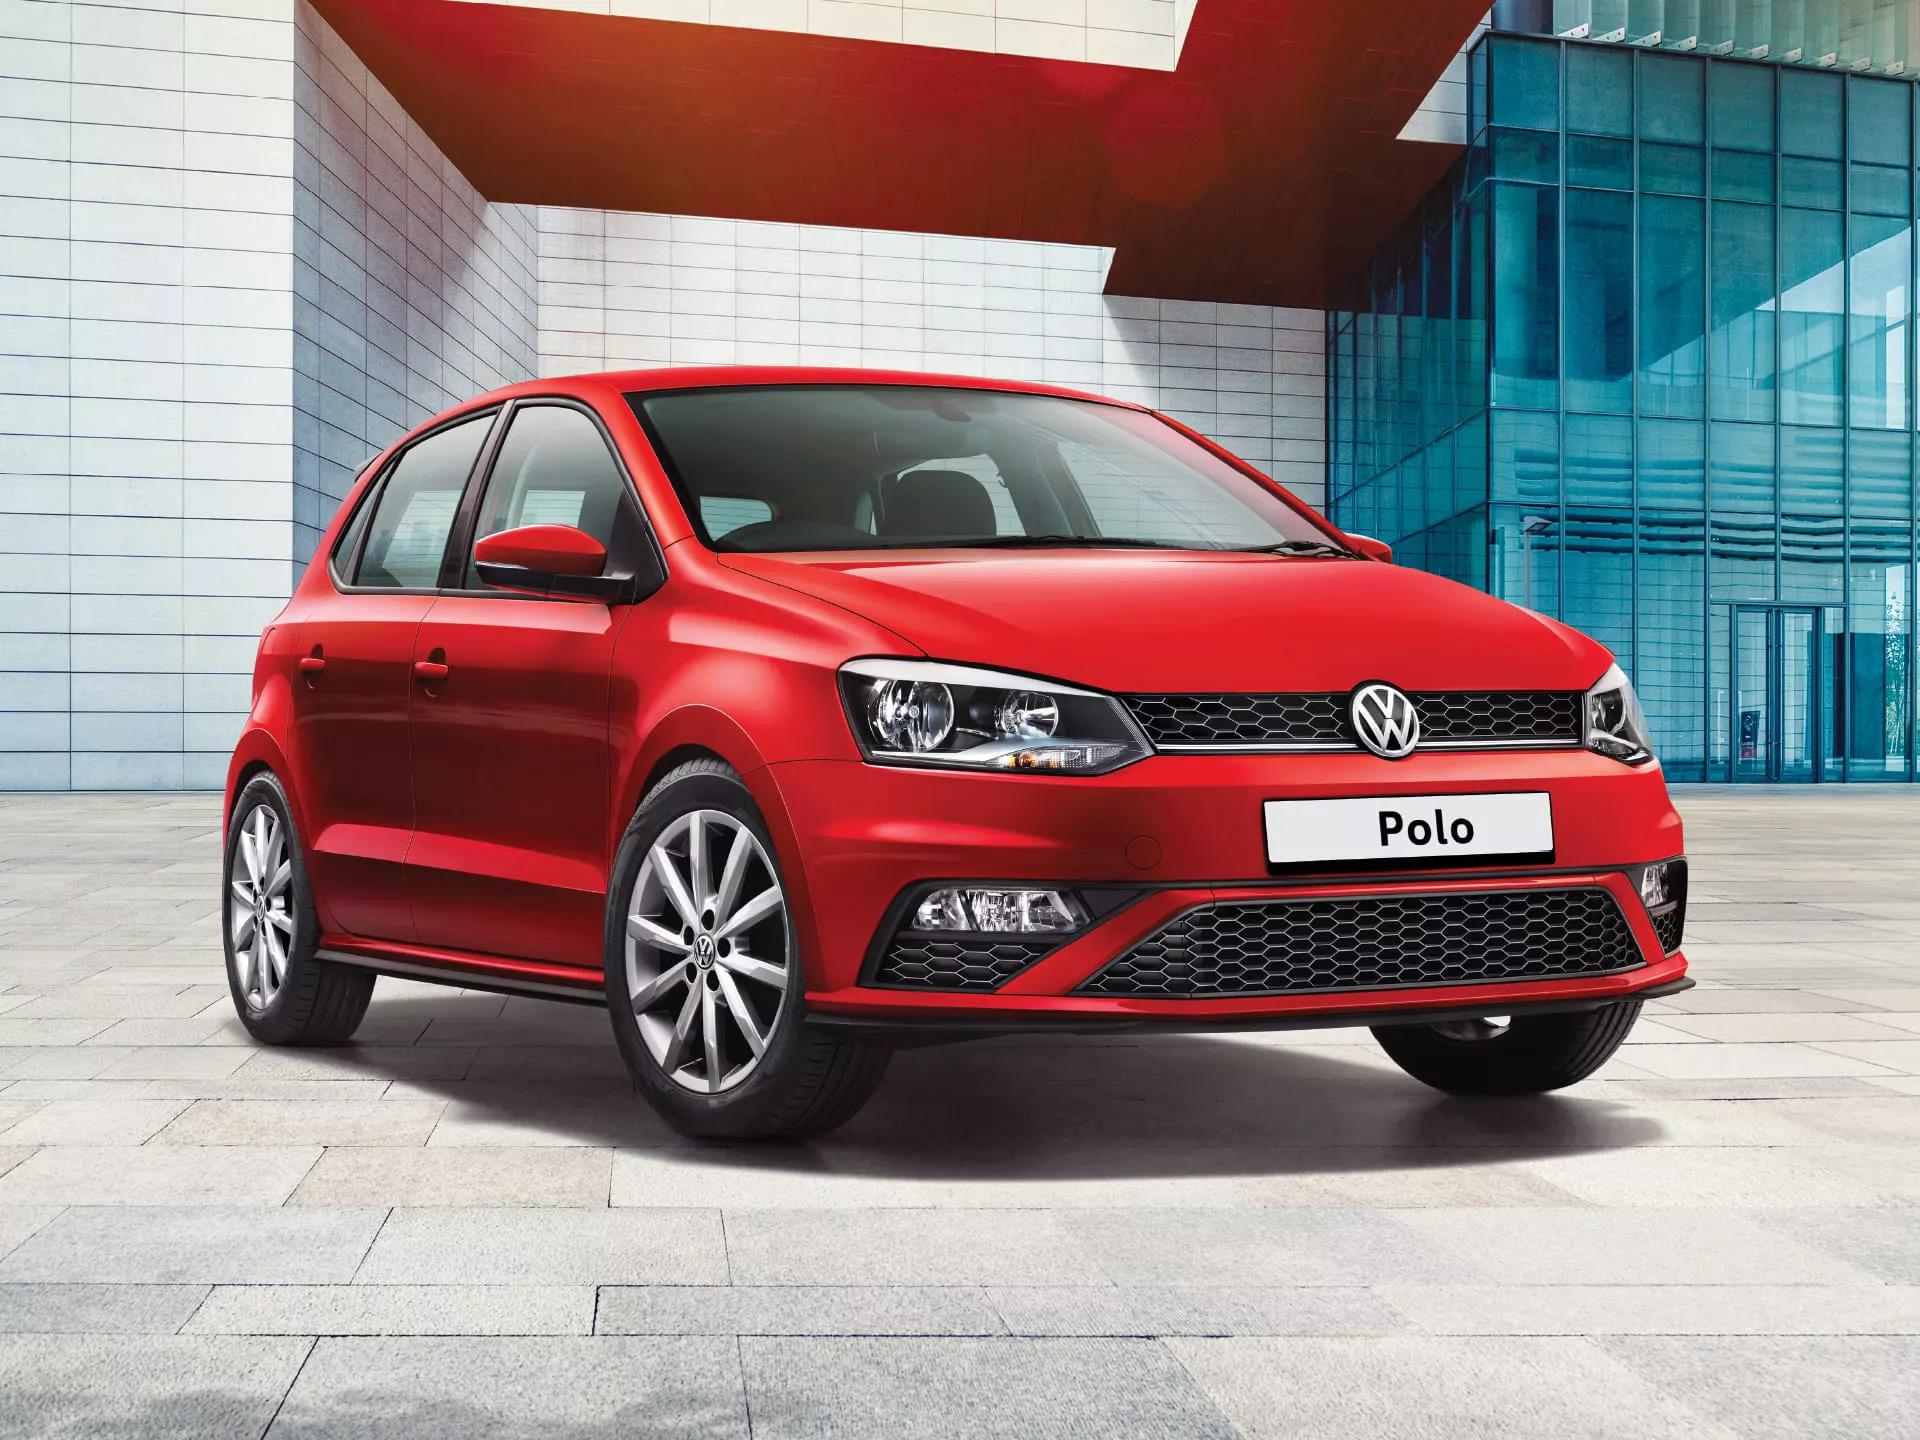 Volkswagen Polo Highline Plus Automatic Specs And Price In India | Free ...